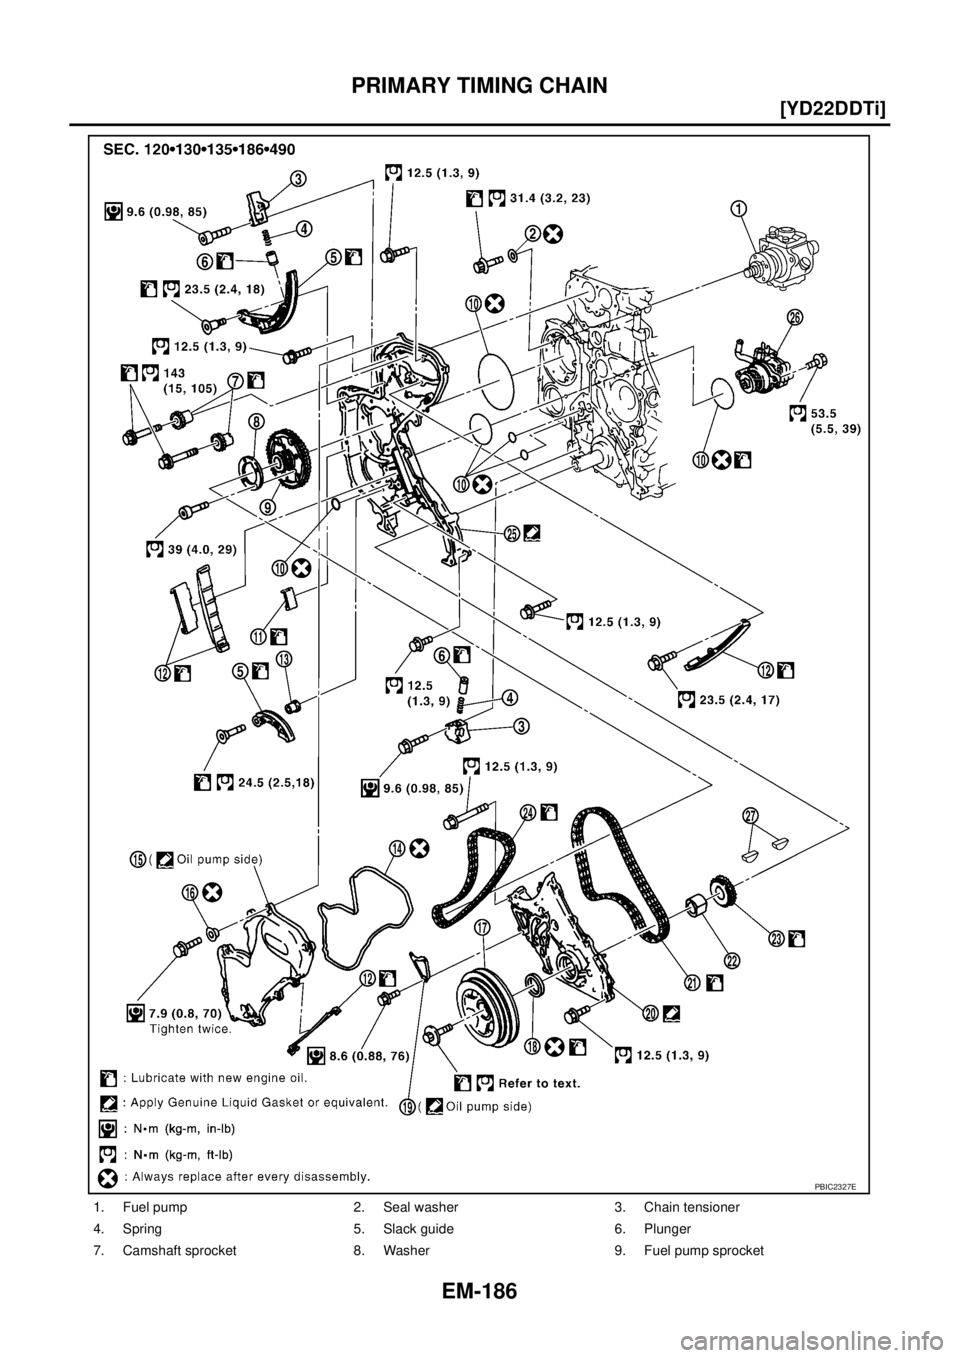 NISSAN X-TRAIL 2003  Service Service Manual EM-186
[YD22DDTi]
PRIMARY TIMING CHAIN
 
1. Fuel pump 2. Seal washer 3. Chain tensioner
4. Spring 5. Slack guide 6. Plunger
7. Camshaft sprocket 8. Washer 9. Fuel pump sprocket
PBIC2327E 